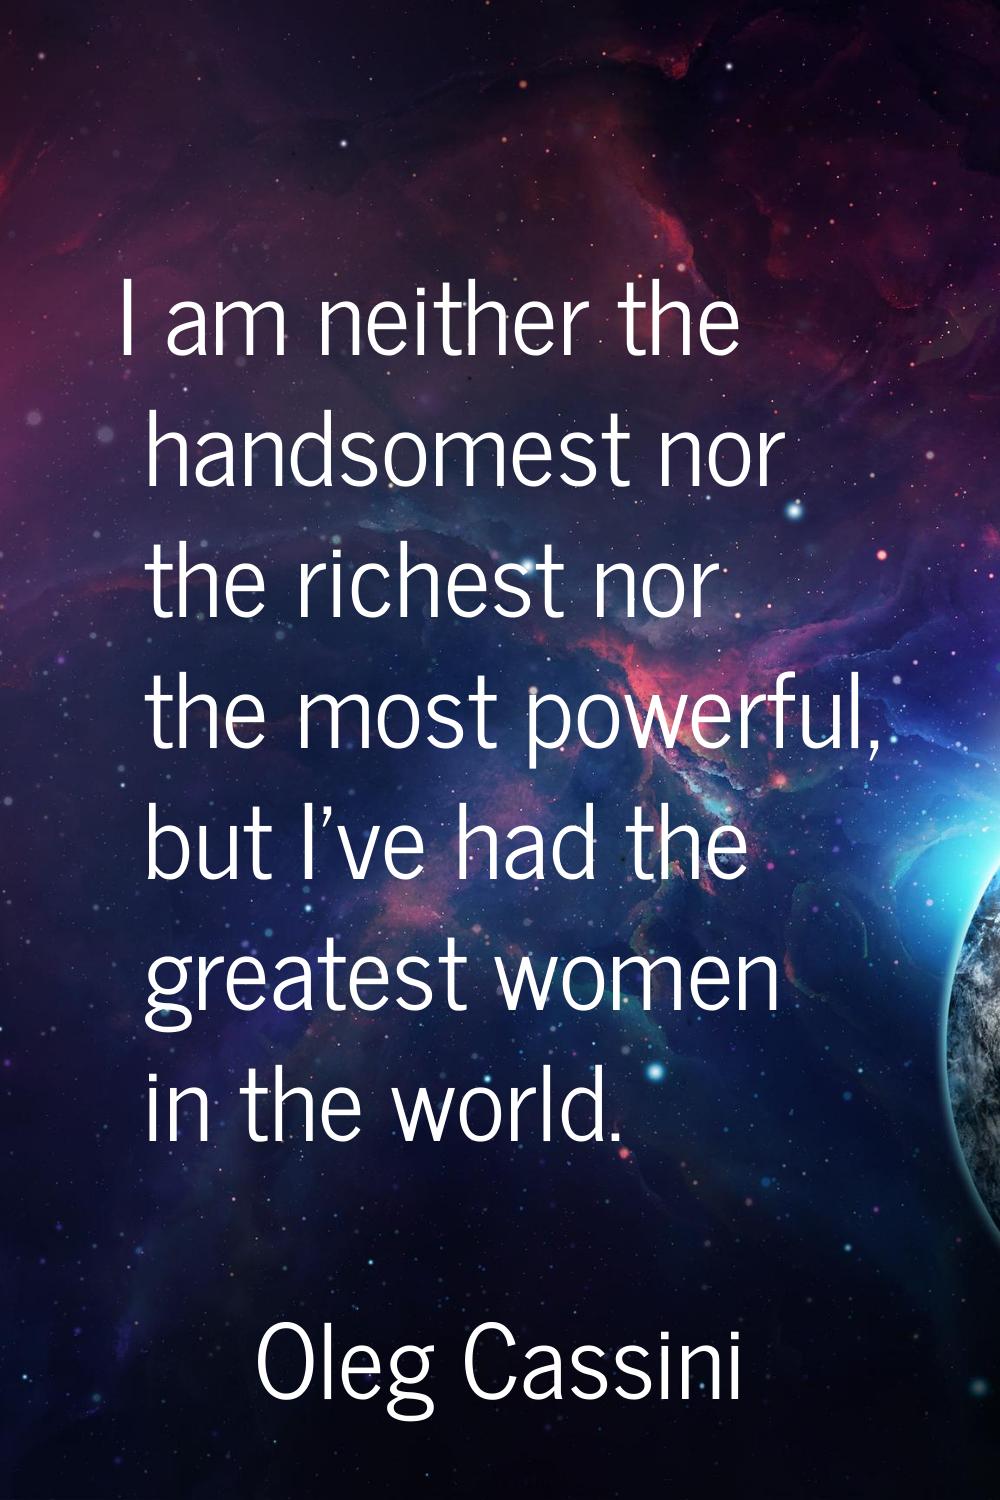 I am neither the handsomest nor the richest nor the most powerful, but I've had the greatest women 